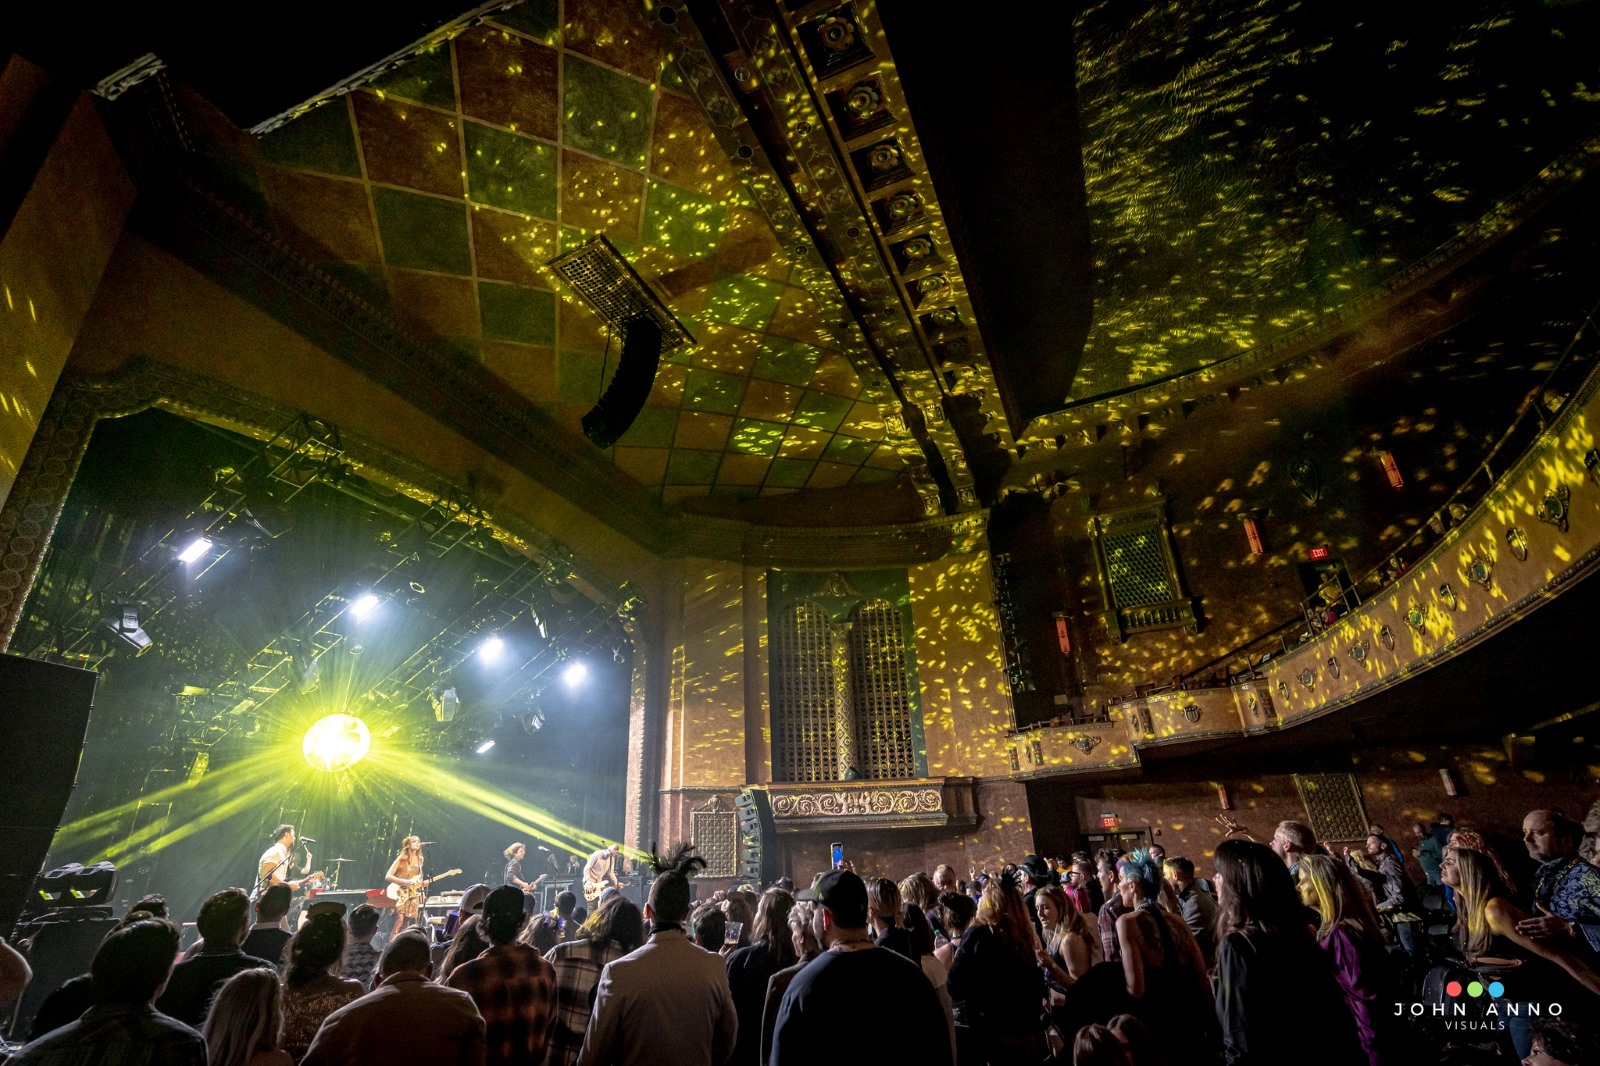 The Mixtapes perform on the stage at the Historic Gillioz Theatre.